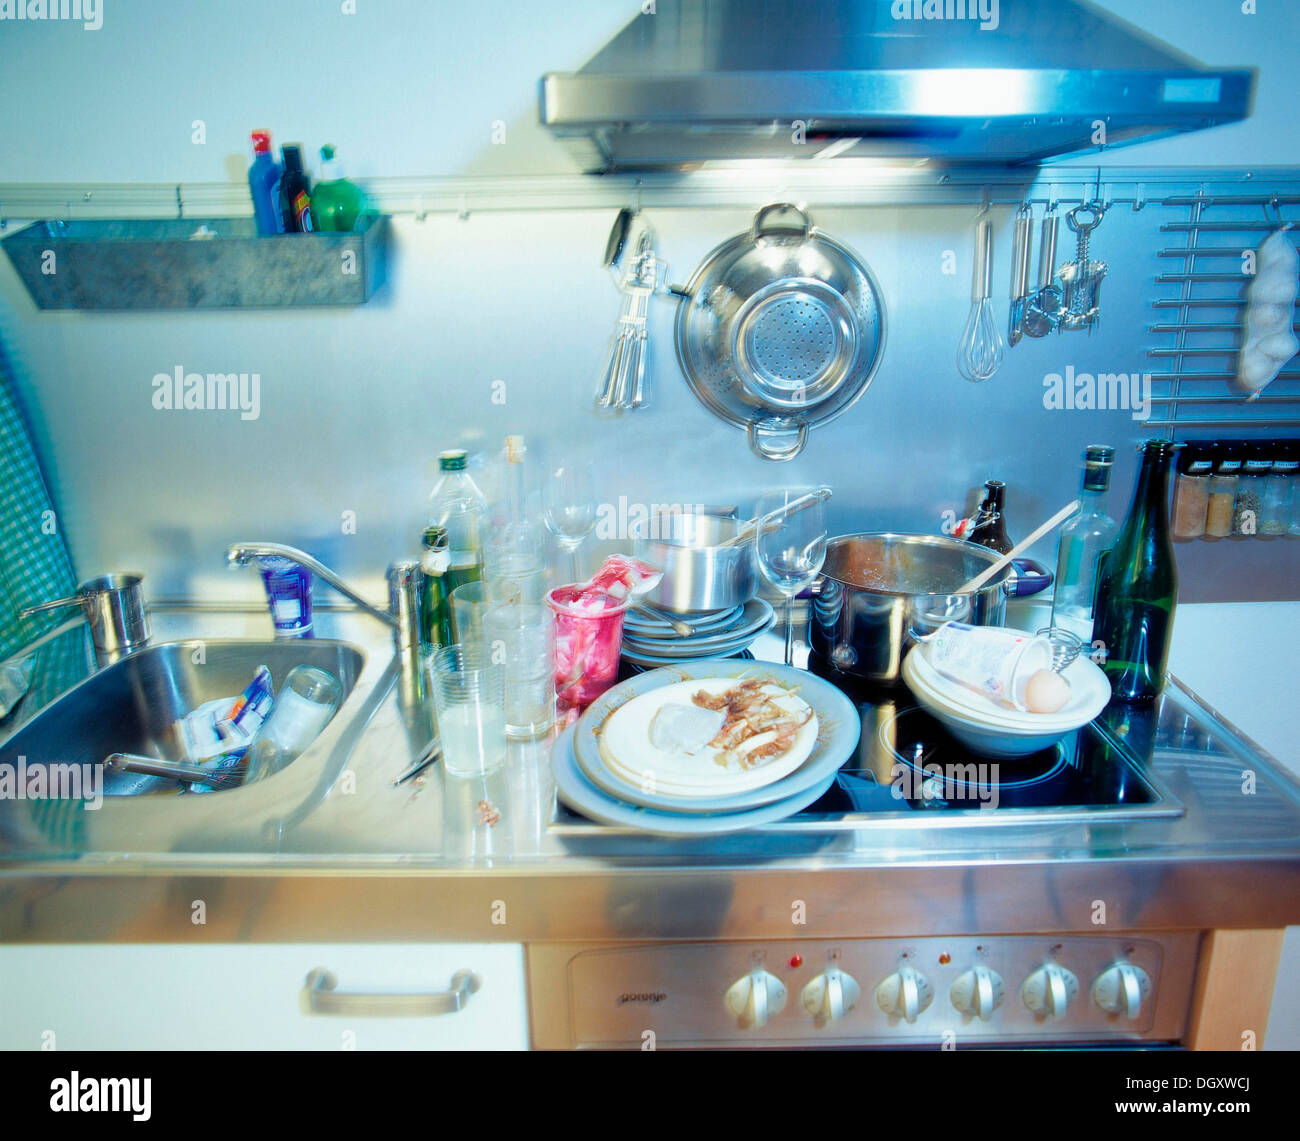 Dirty dishes in a kitchen Stock Photo - Alamy